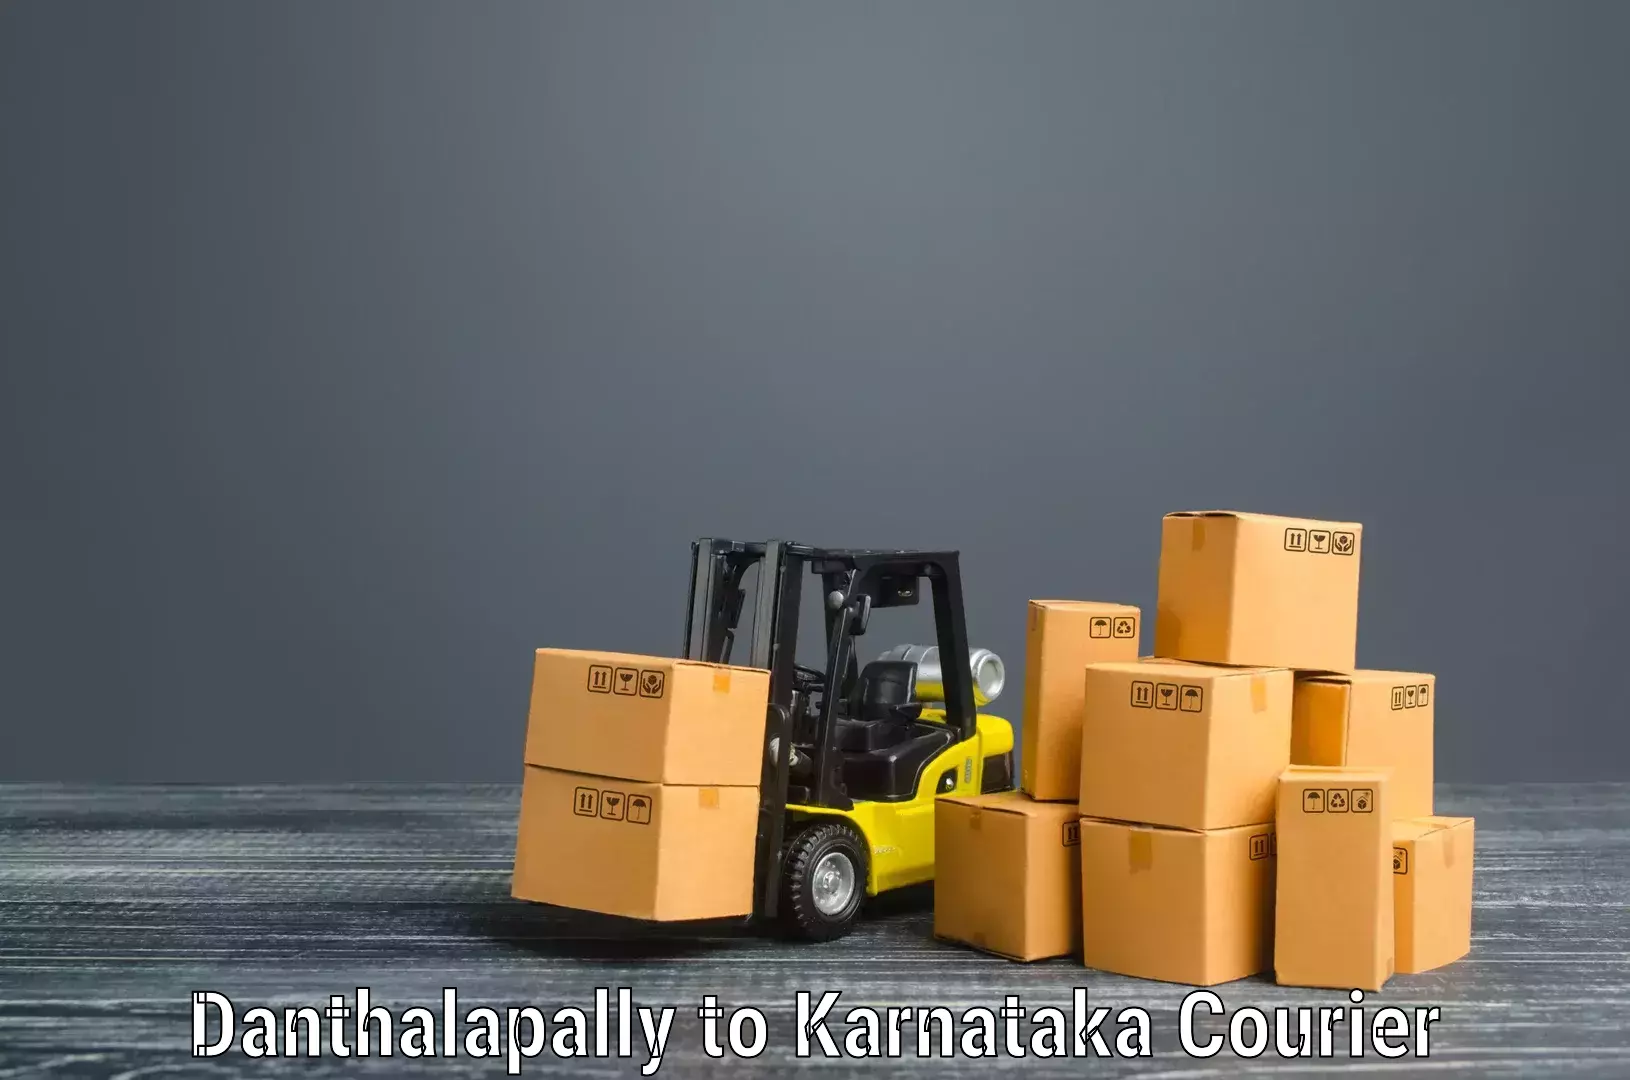 Professional furniture movers in Danthalapally to Chittapur